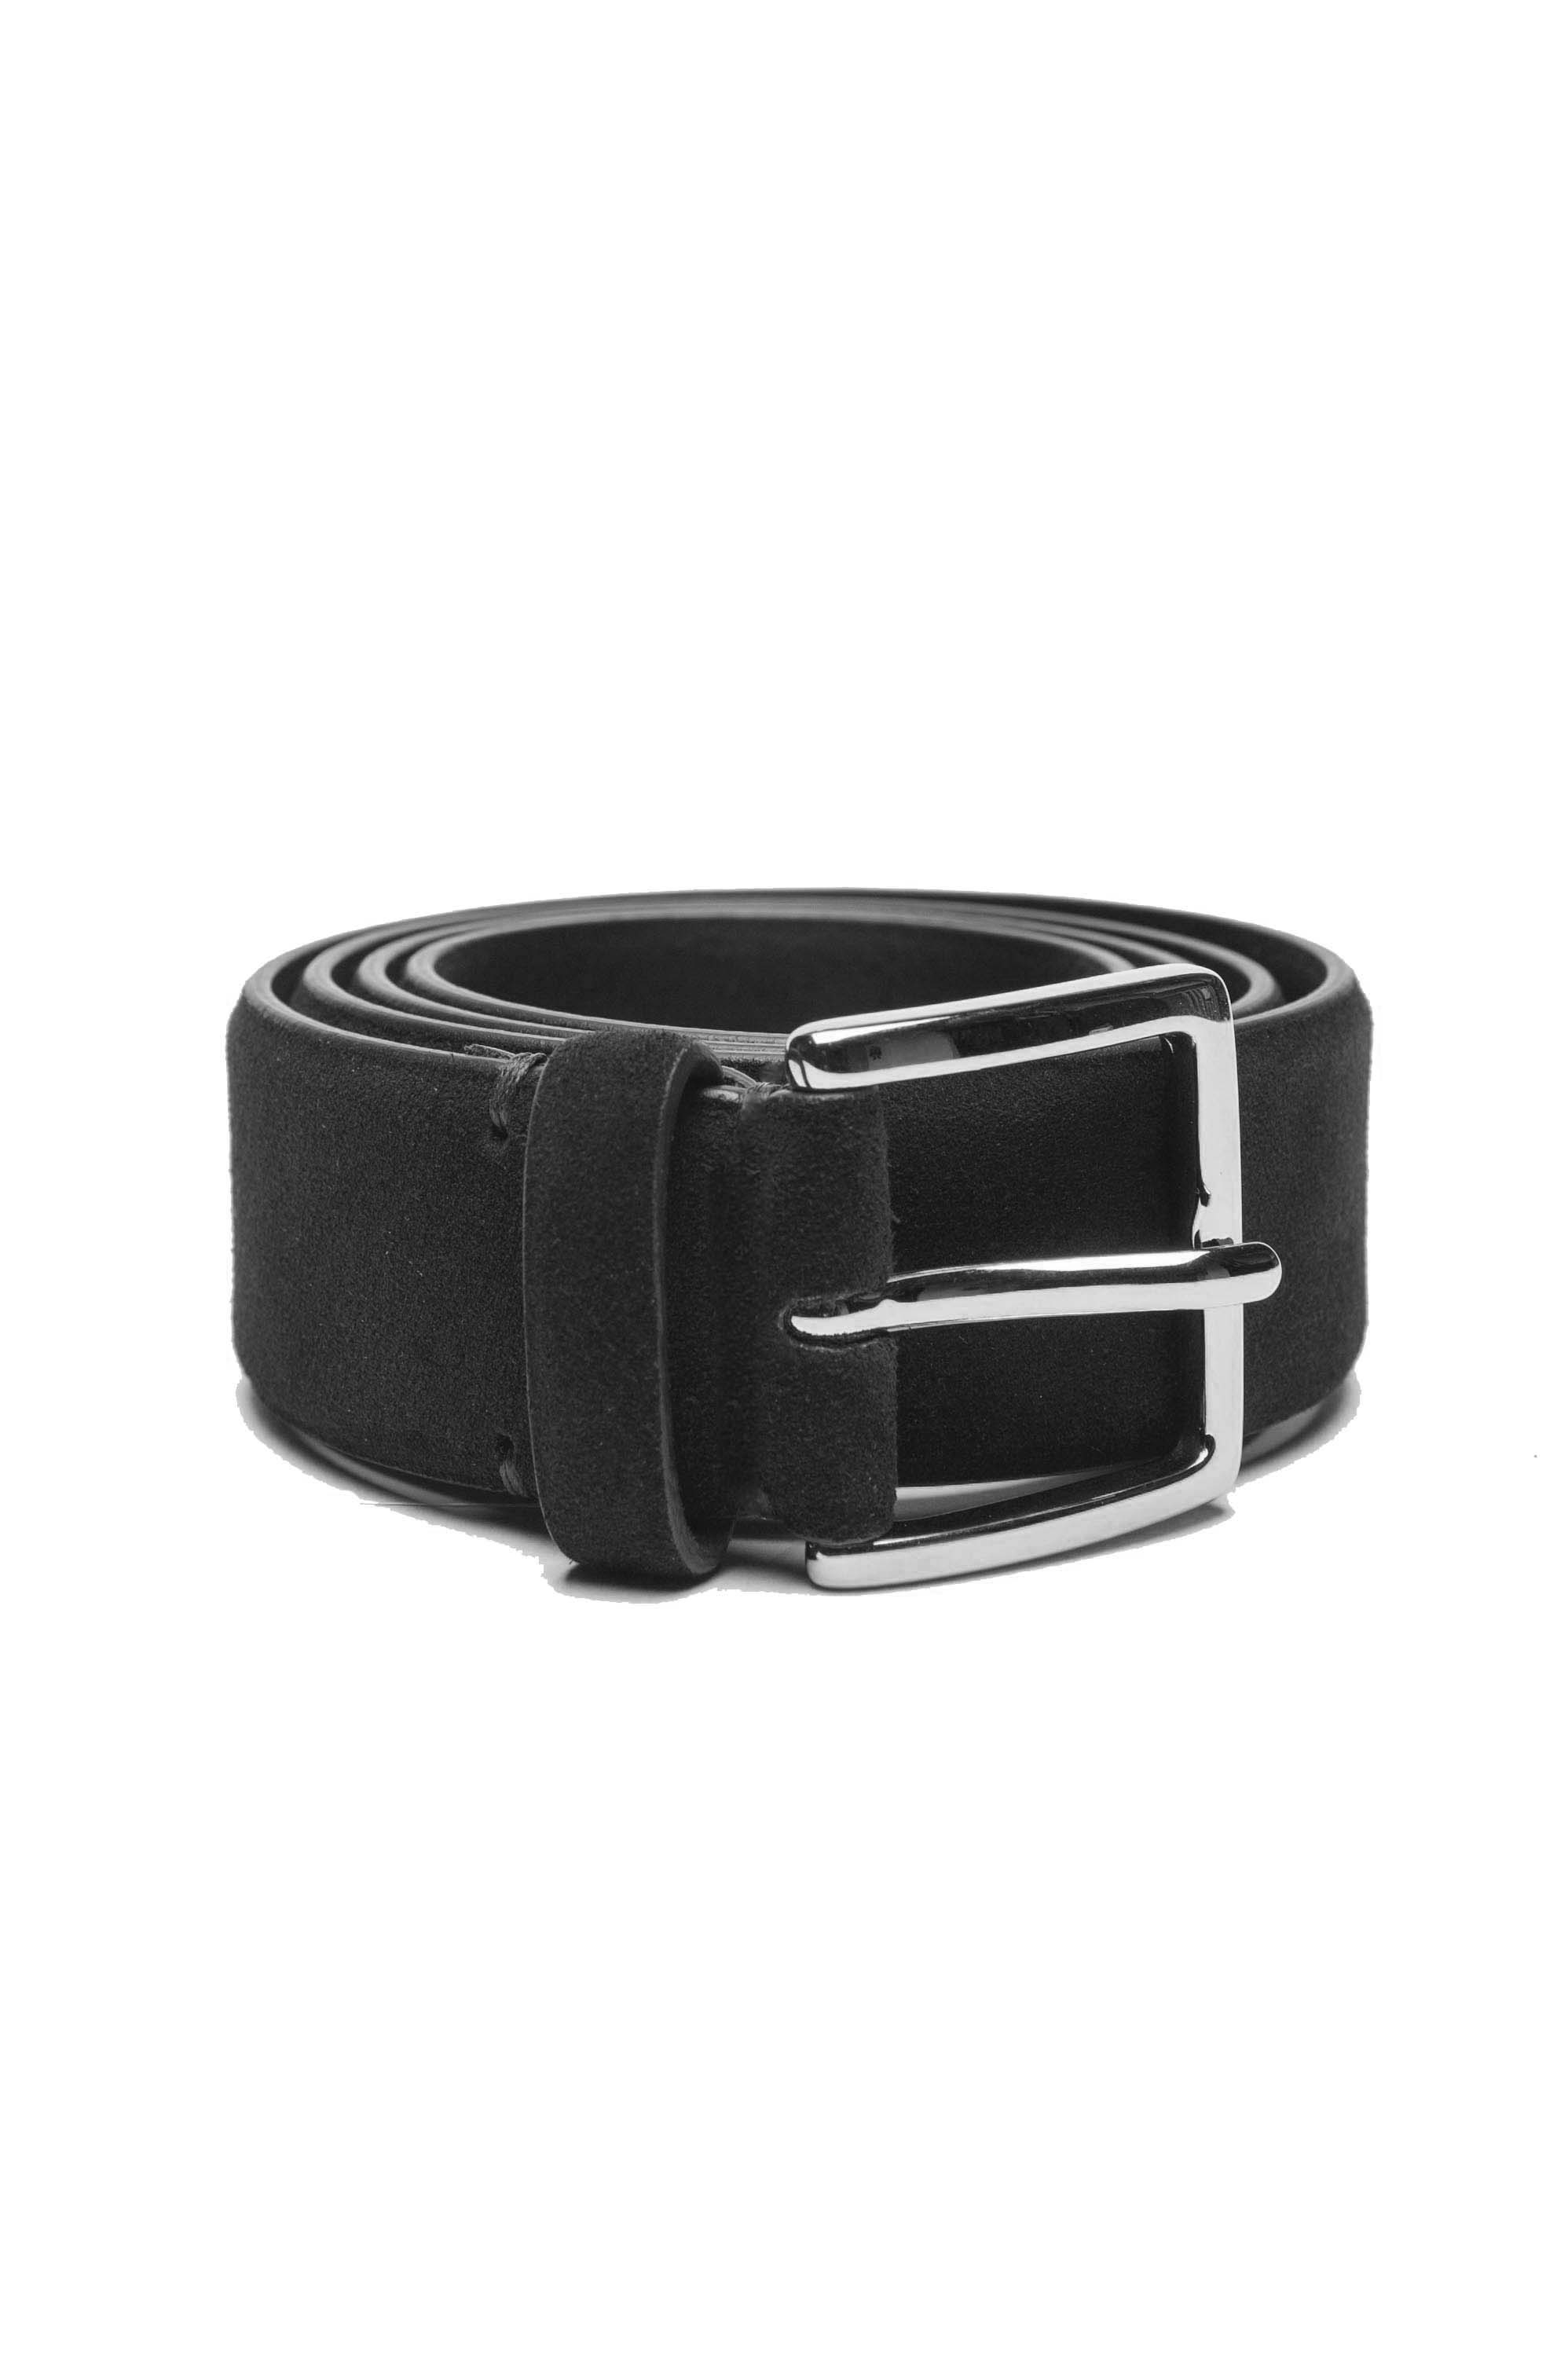 SBU 04818_23AW Classic belt in black suede leather 1.4 inches 01